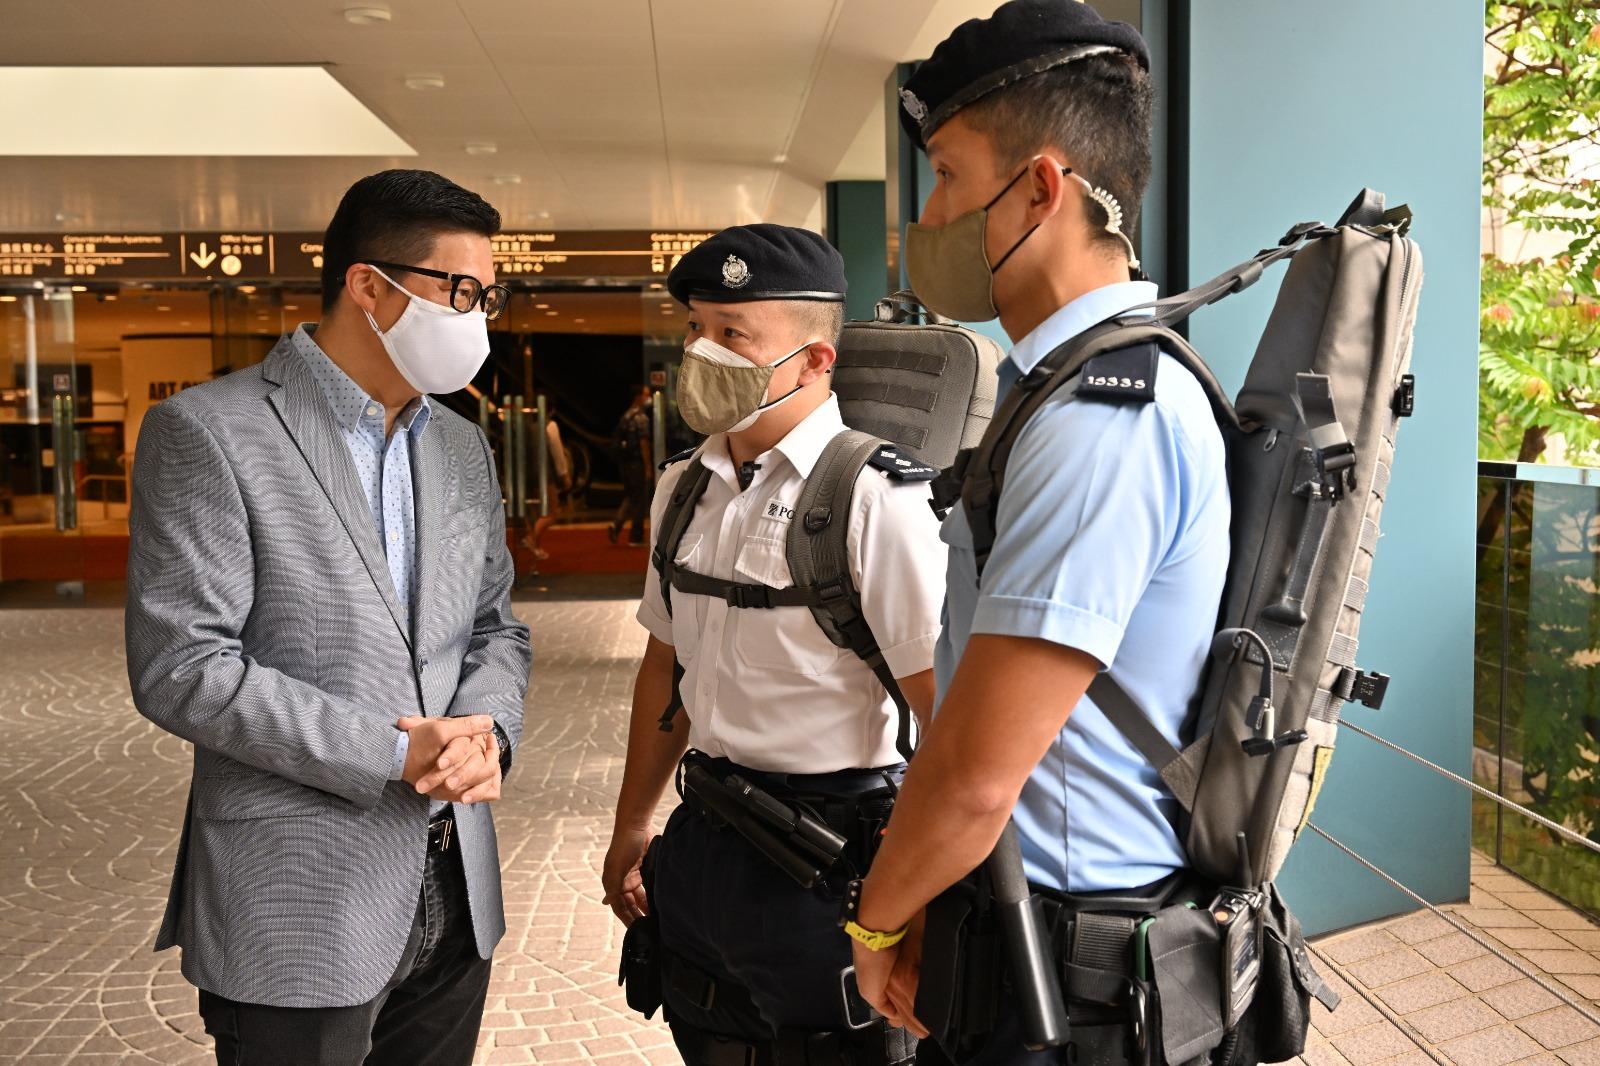 The Secretary for Security, Mr Tang Ping-keung, this morning (May 8) inspected the security arrangements in the vicinity of the Hong Kong Convention and Exhibition Centre to ensure the 2022 Chief Executive Election be conducted in a safe and orderly manner. Photo shows Mr Tang (left) meeting the personnel of the Counter Terrorism Response Unit of the Police on duty nearby and giving them words of encouragement.